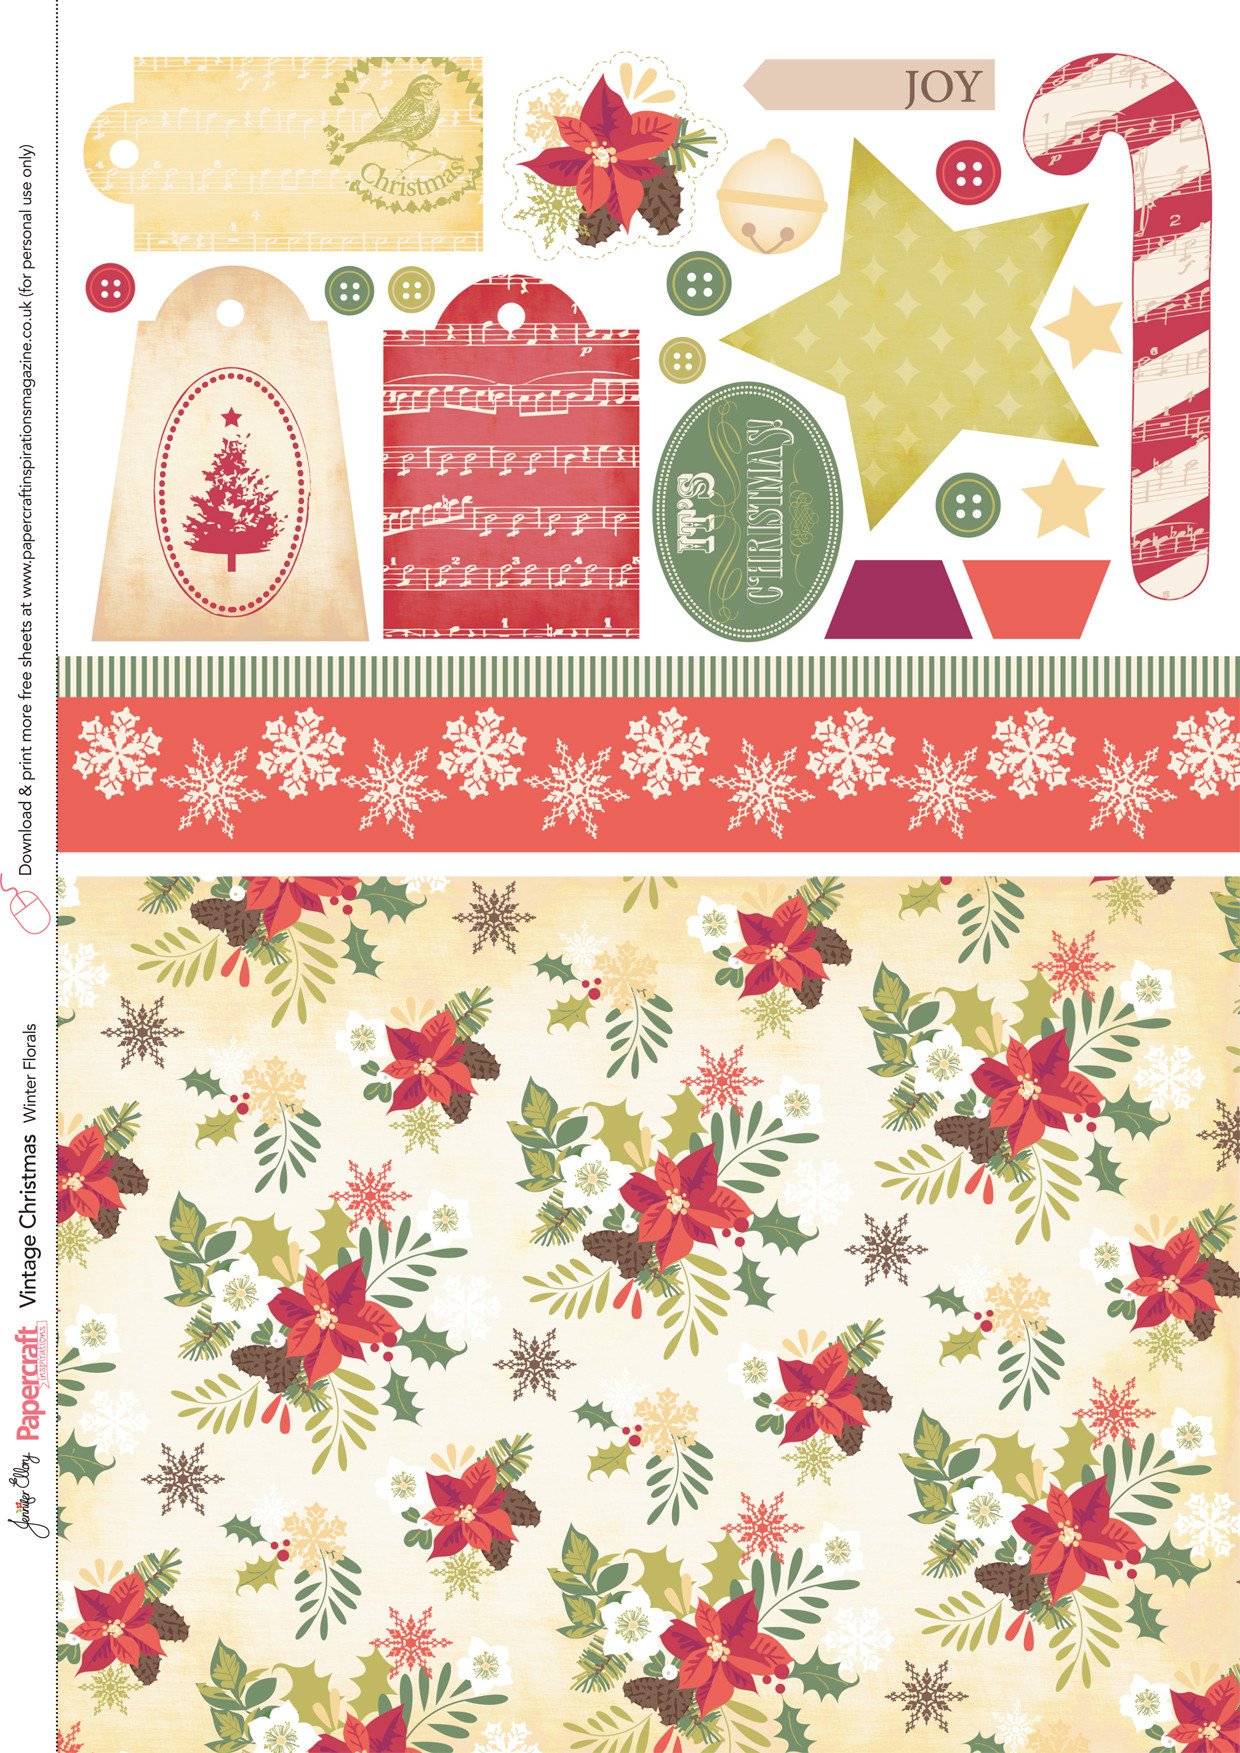 FREE Vintage Christmas papers from Papercraft Inspirations